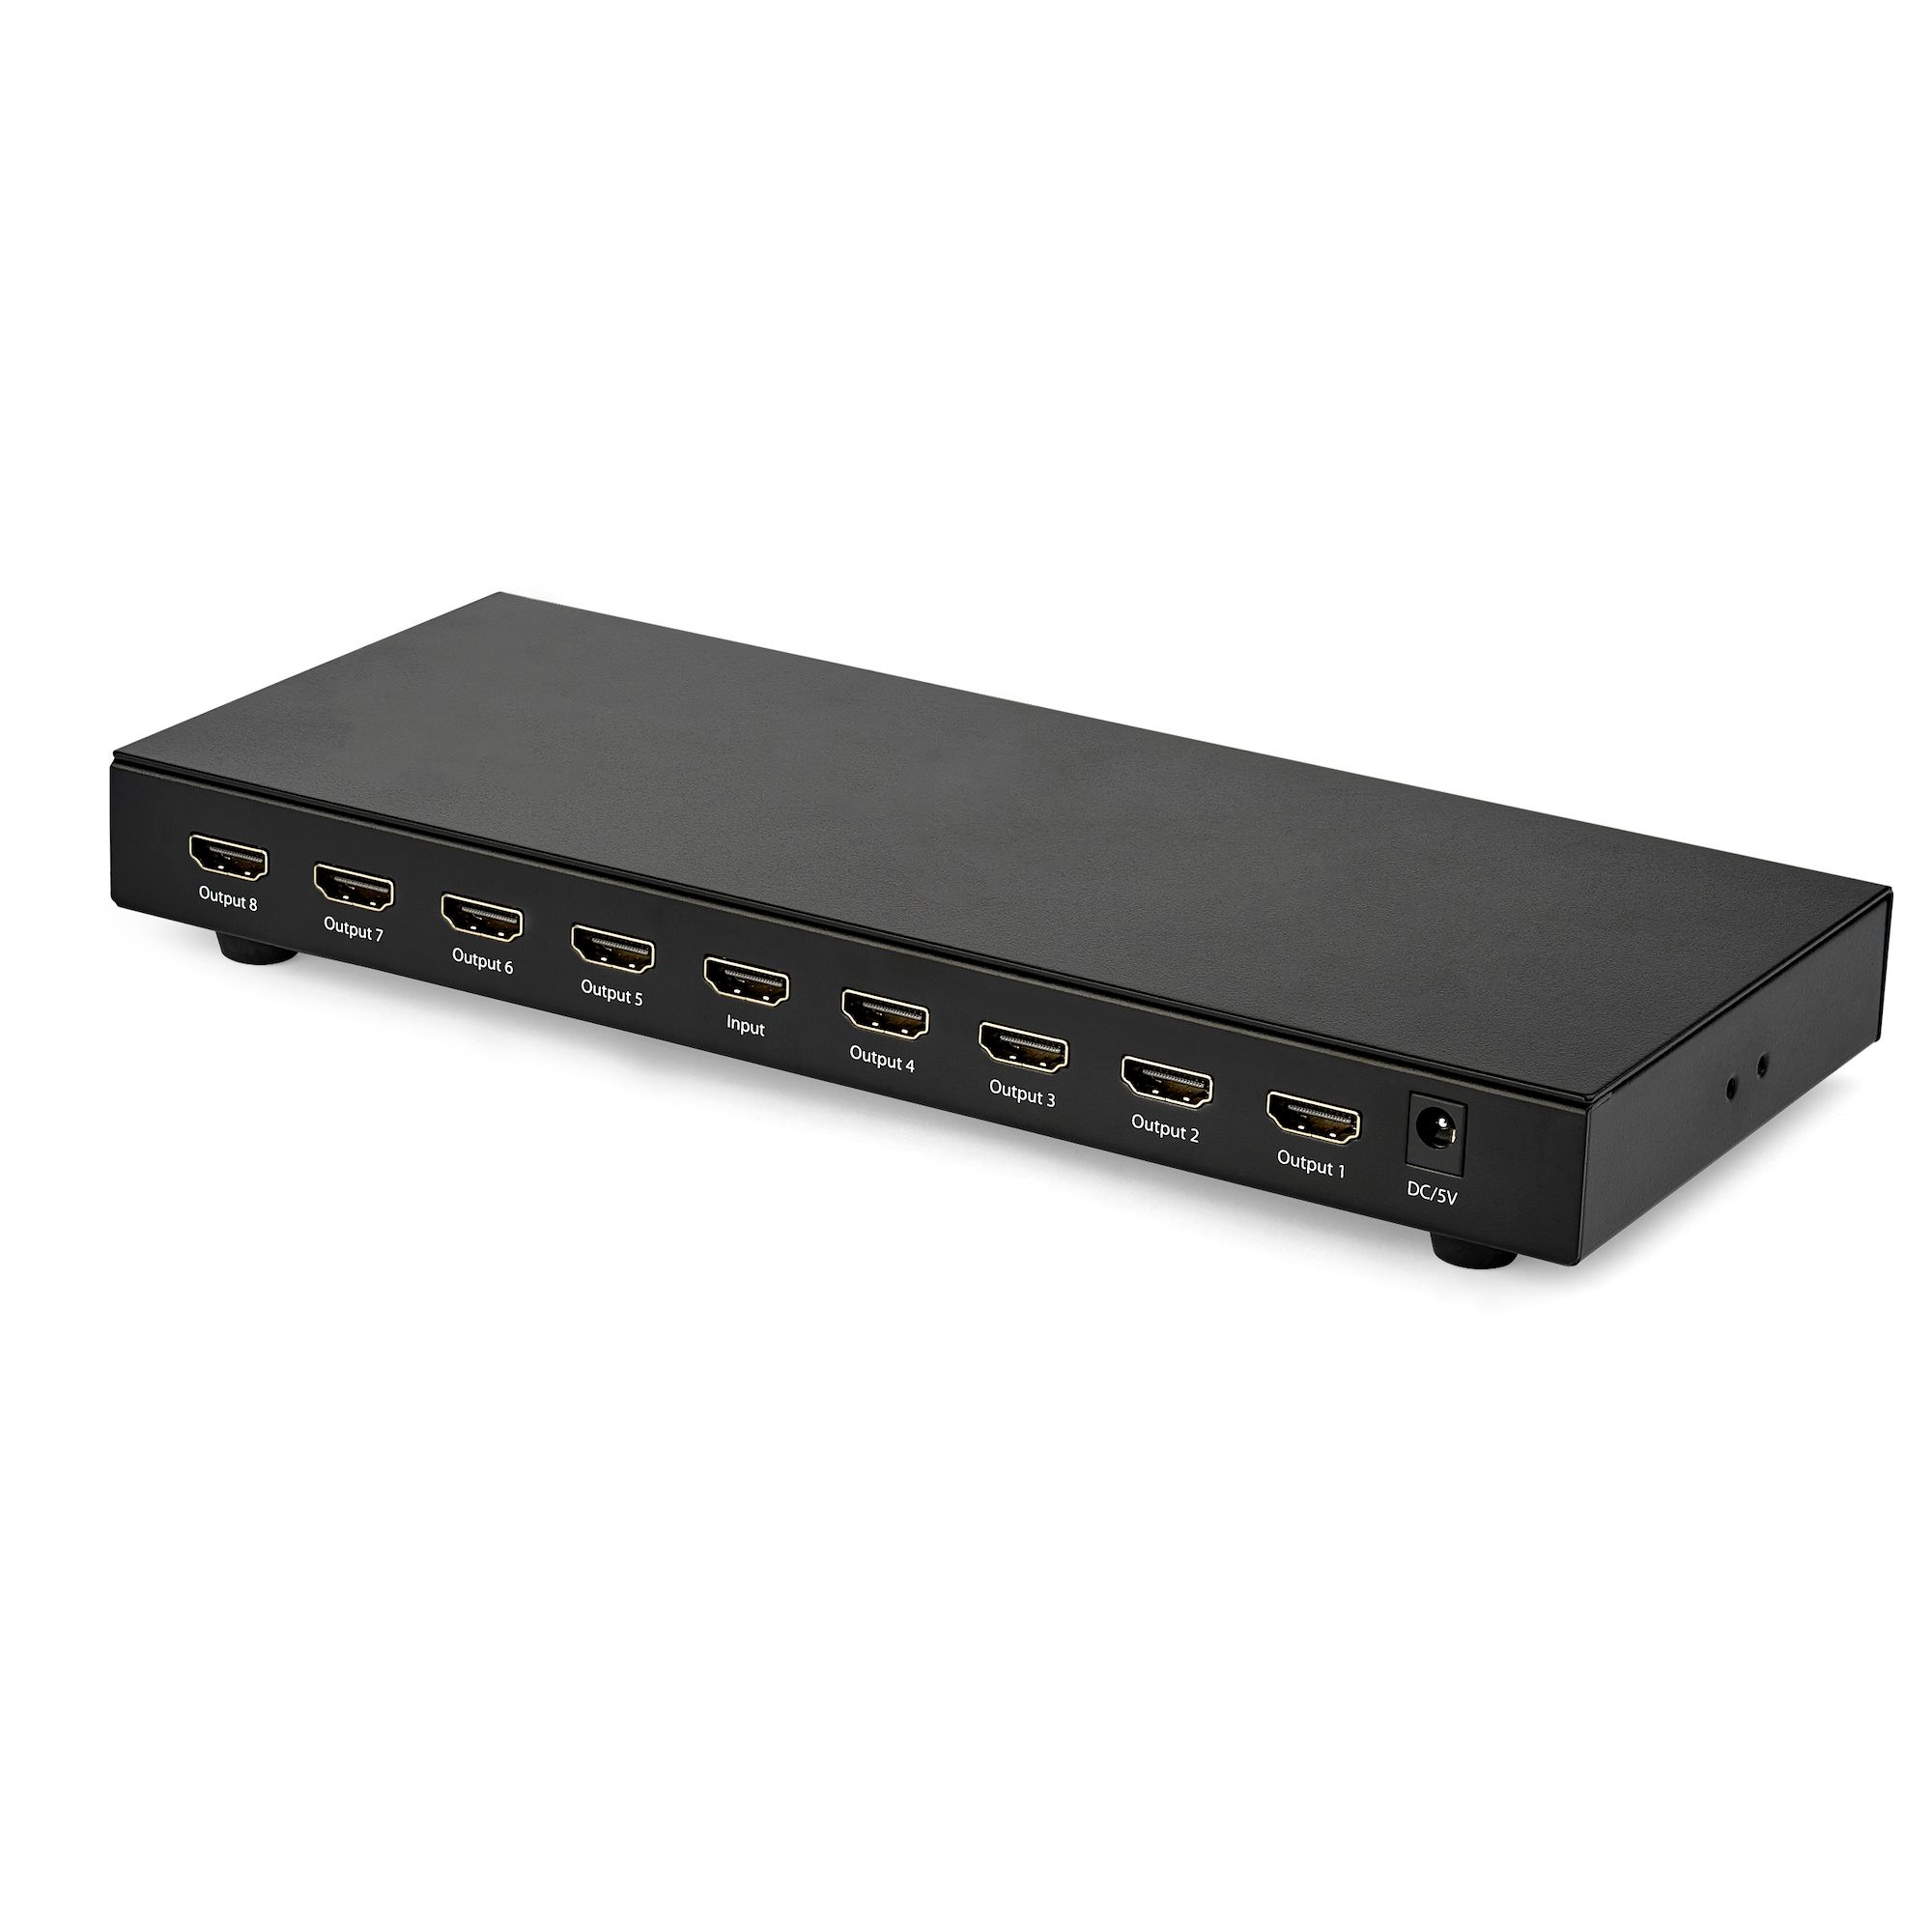 StarTech.com 8-Port 4K 60Hz HDMI Splitter - HDR - HDMI 2.0 Splitter - 7.1 Surround Sound Audio - Easily distribute an HDMI 4K signal to up monitors with